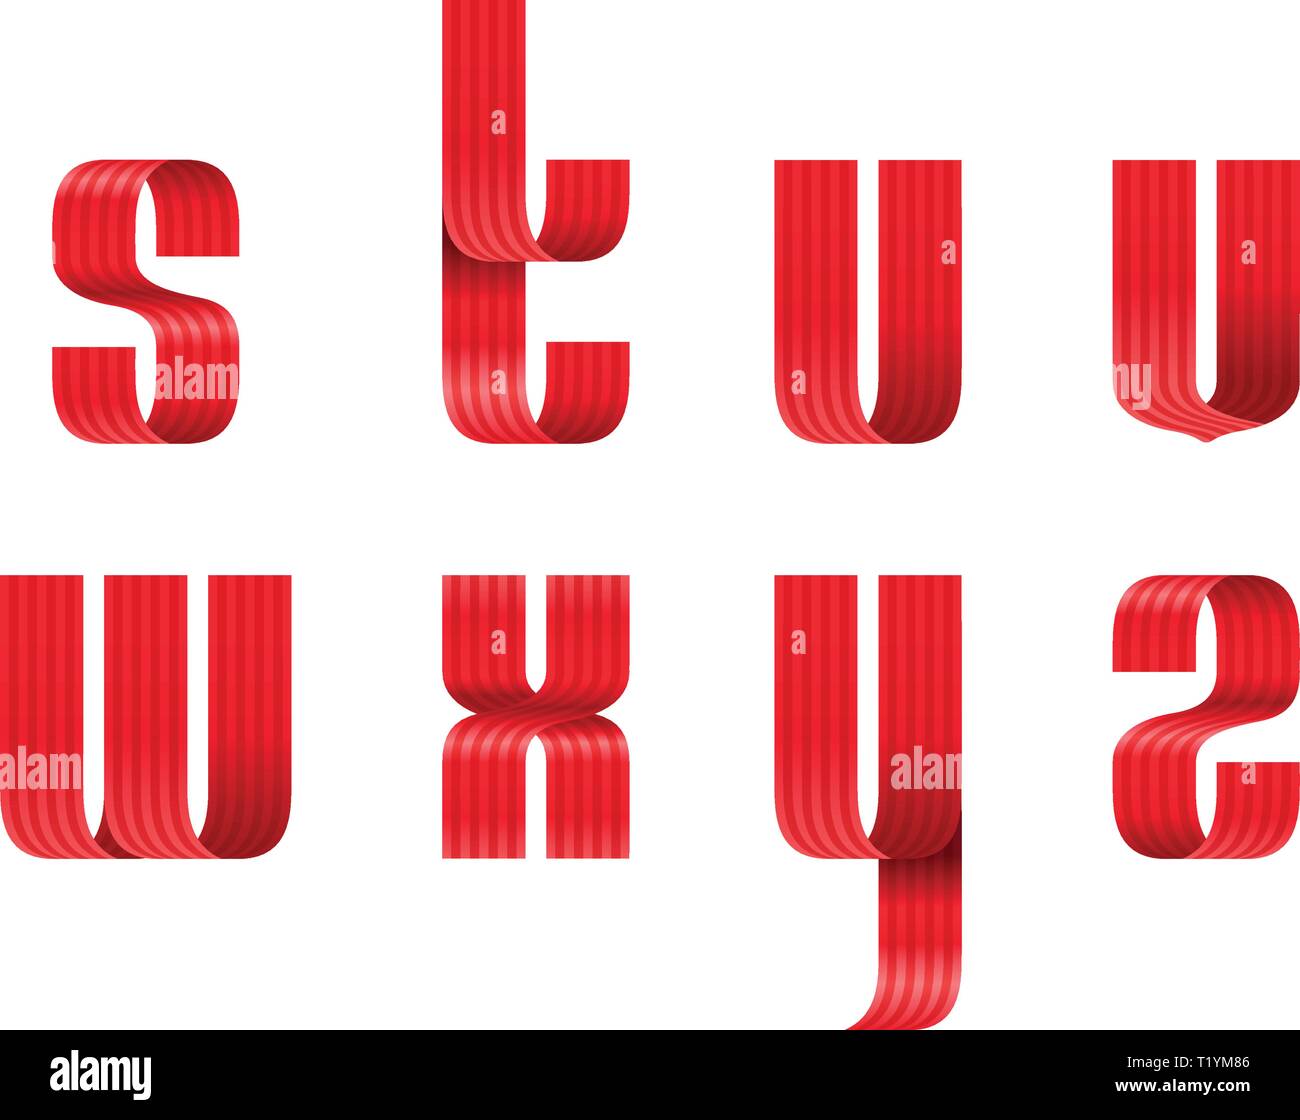 s, t, u, v, w, x, y, z lowercase letters font from a red ribbon with strip and smooth curves and shadows Stock Vector